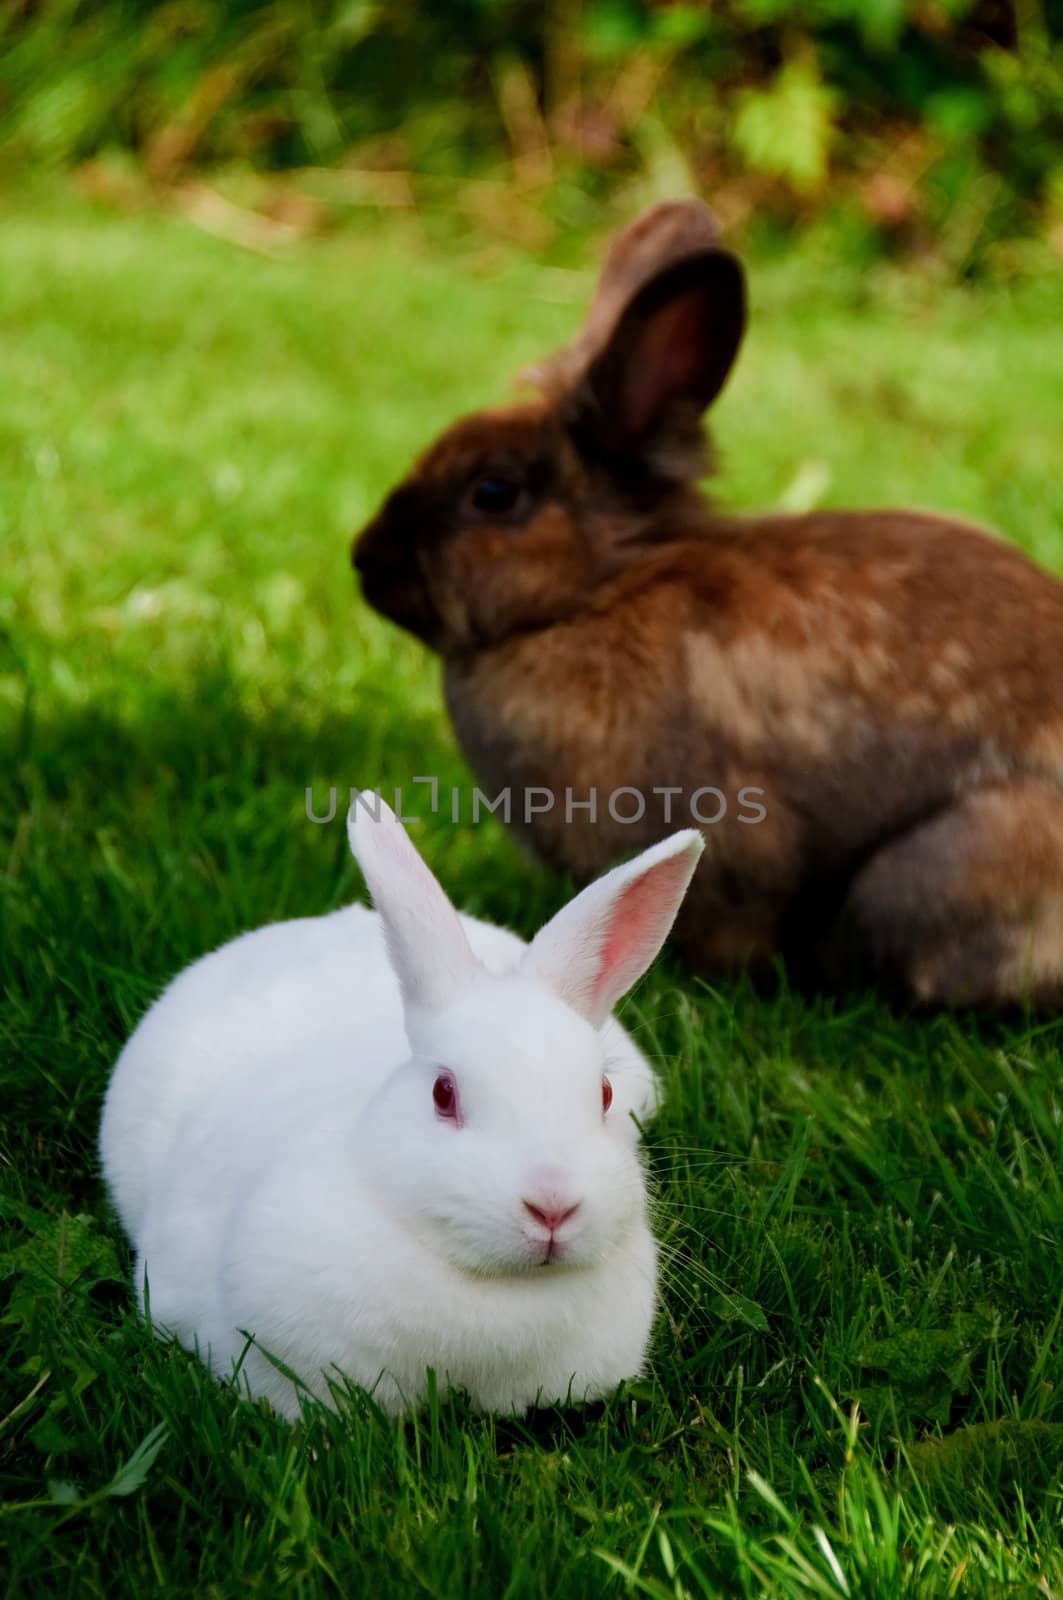 A white rabbit and a brown rabbit in the background